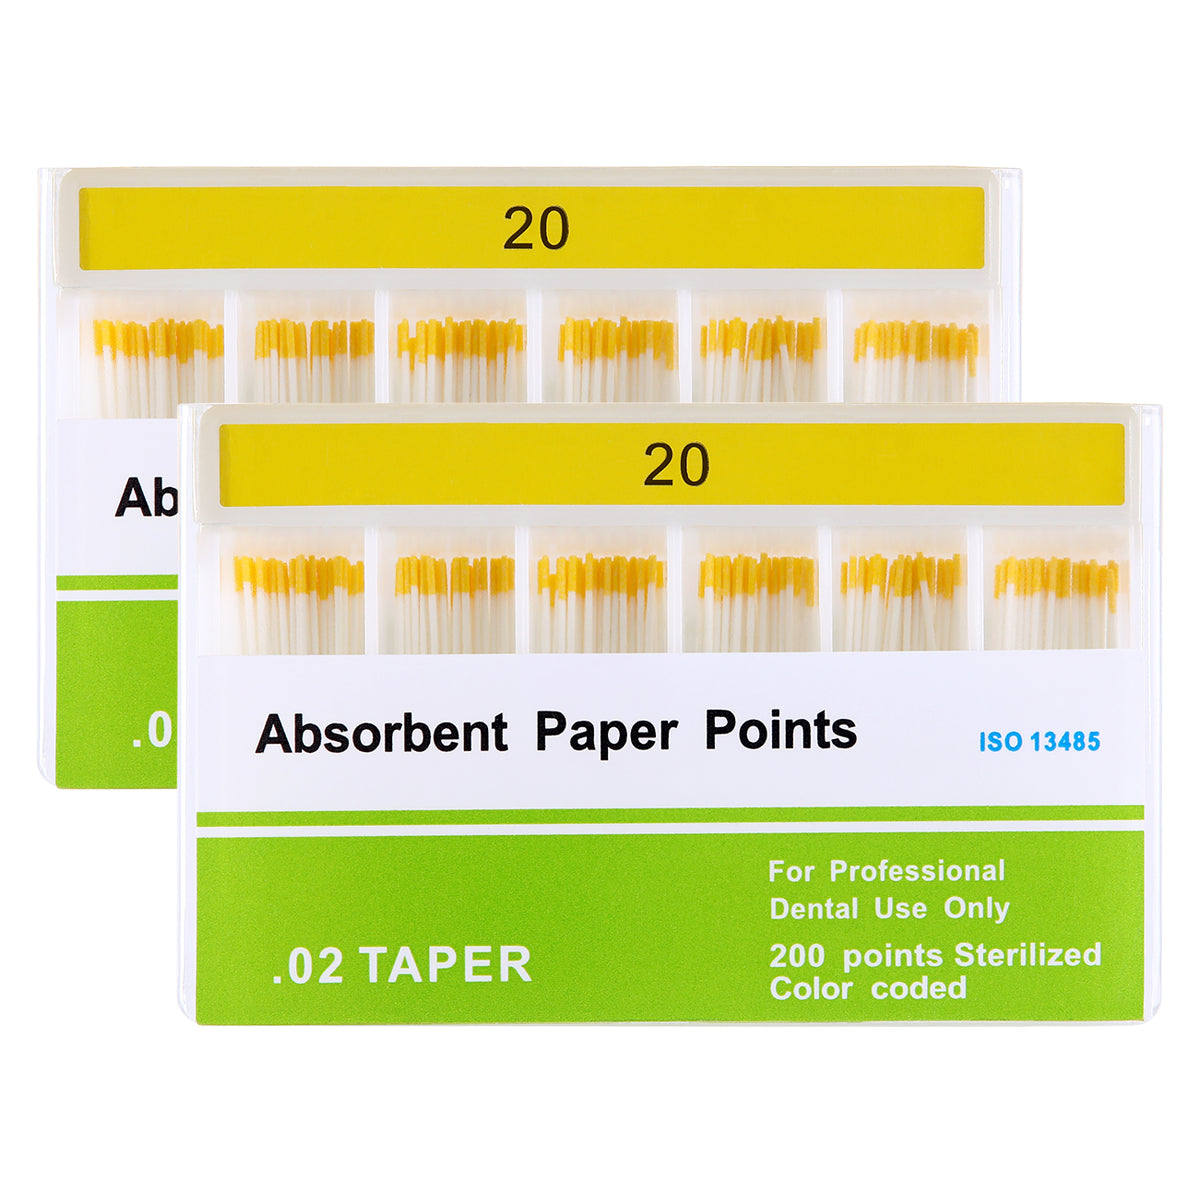 2 Boxes Absorbent Paper Points #20 Taper Size 0.02 Color Coded 200/Box - azdentall.com